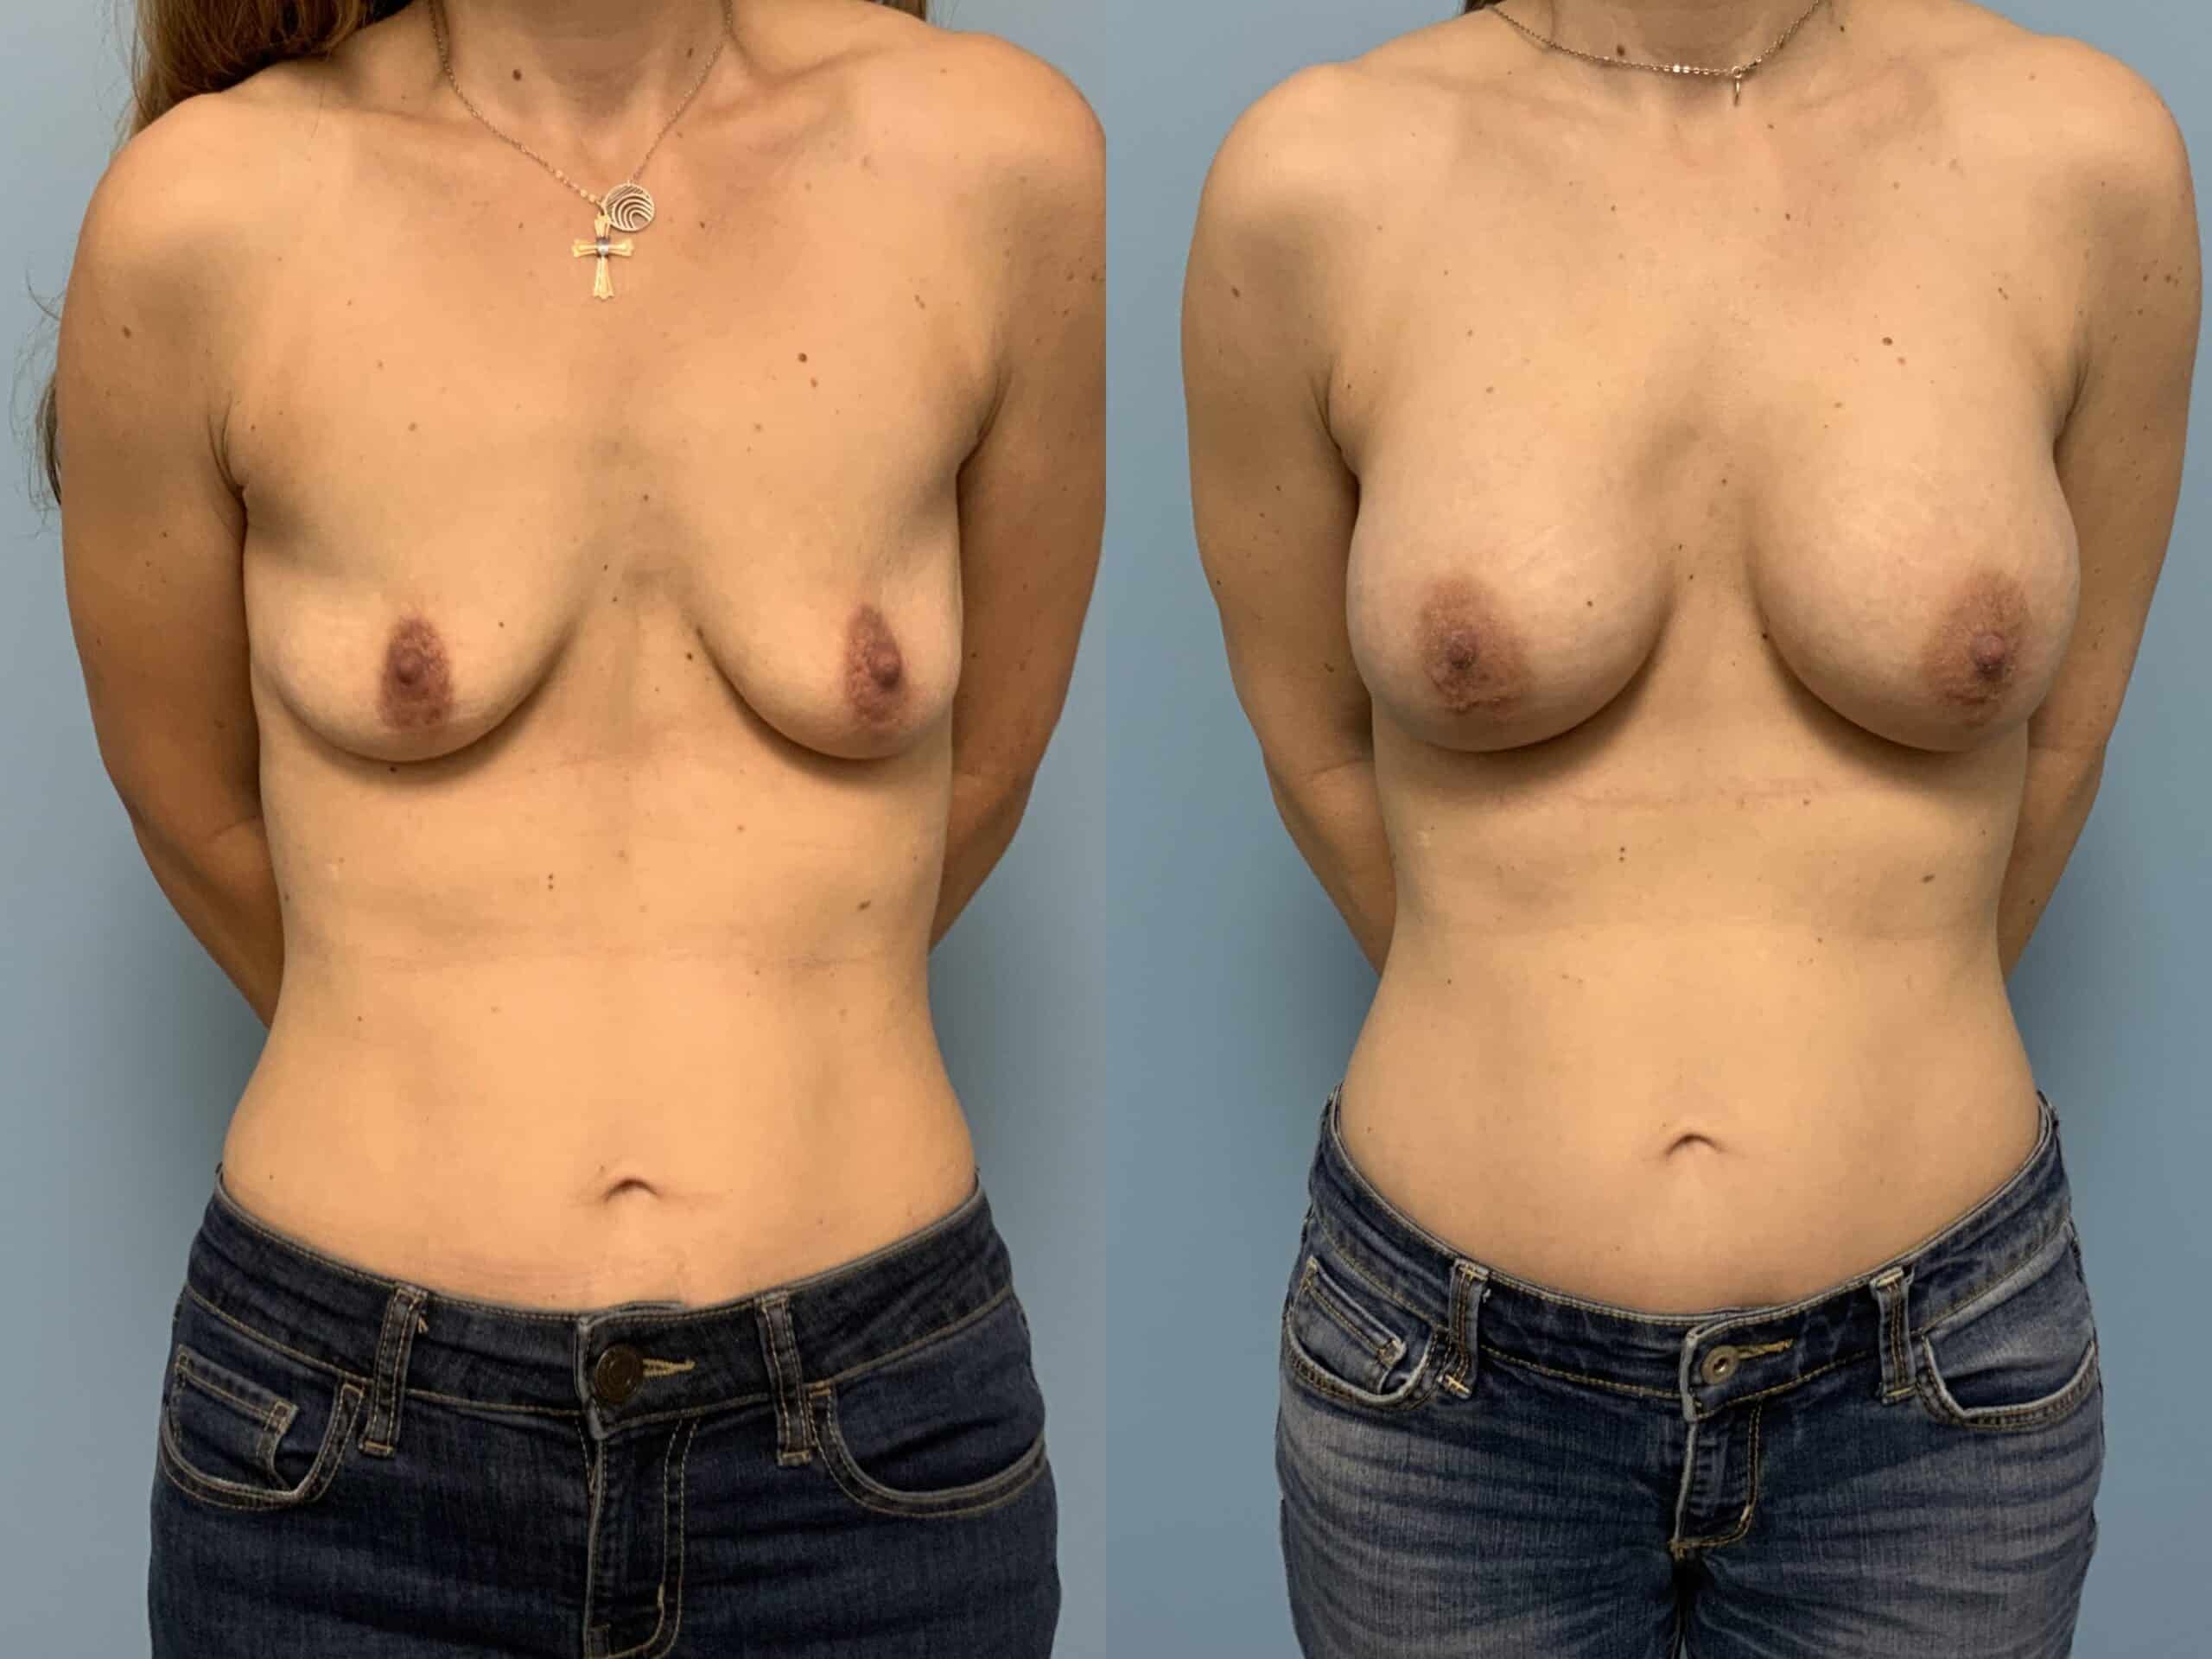 Before and after, patient 5 mo post op from Breast augmentation and level III muscle release procedures performed by Dr. Paul Vanek